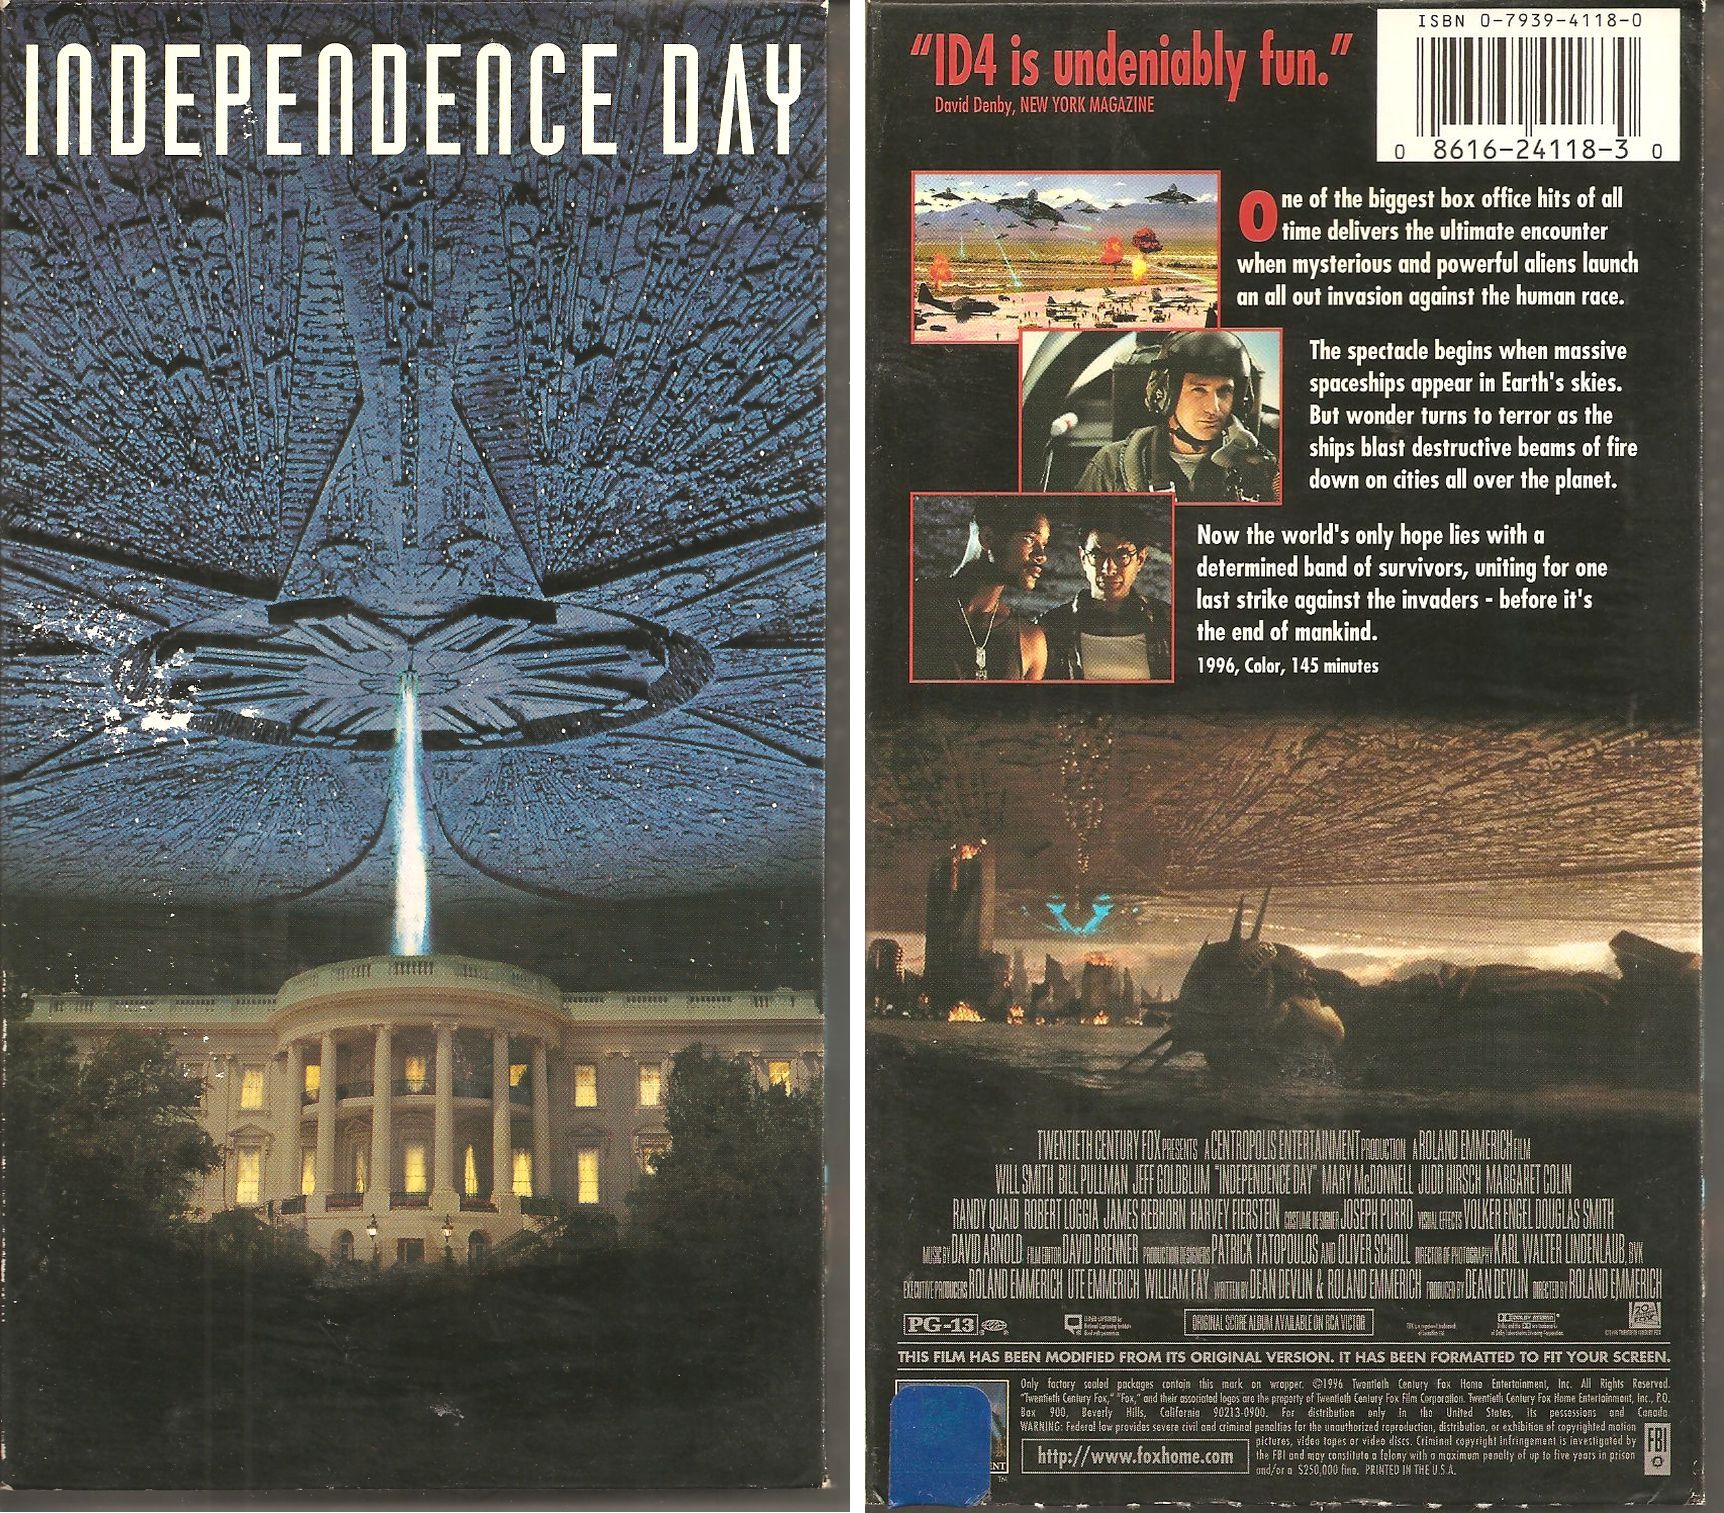 Independence Day VHS 86162411830 | eBay